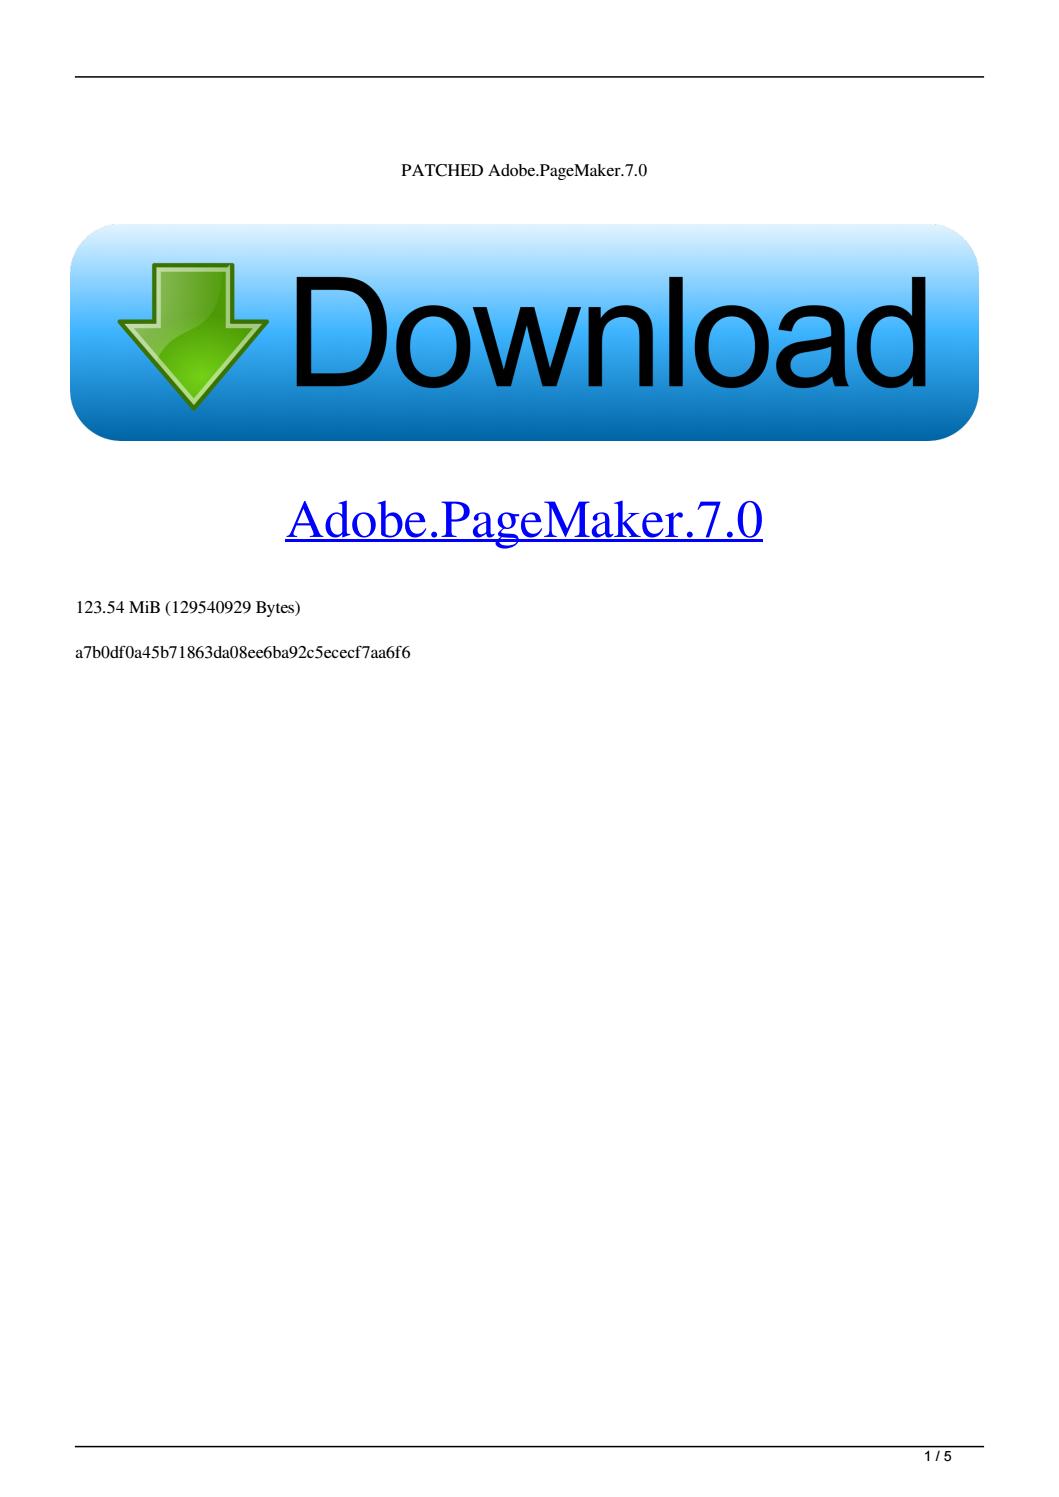 pagemaker 7.0 free download for windows 10